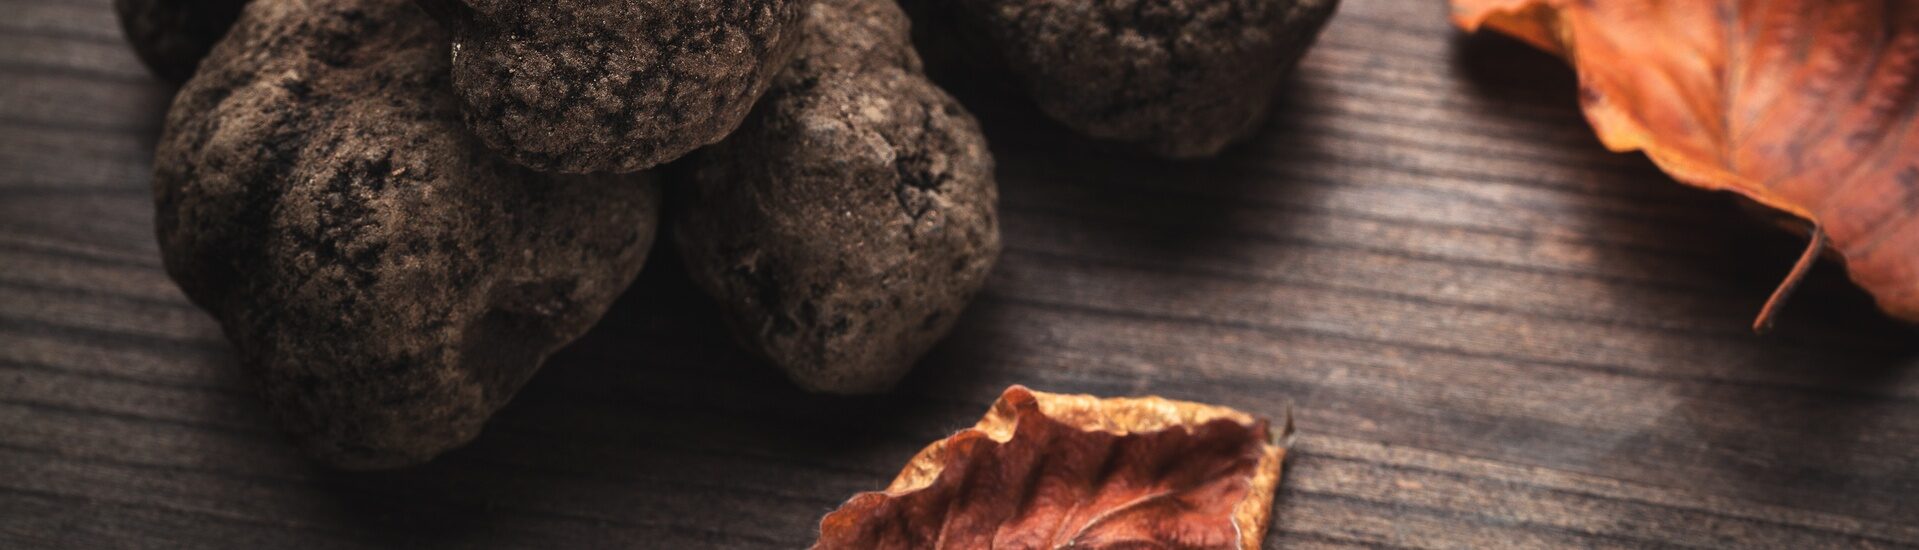 Thinking about truffle cultivation? Things to consider – Shannon Berch and Inga Meadows